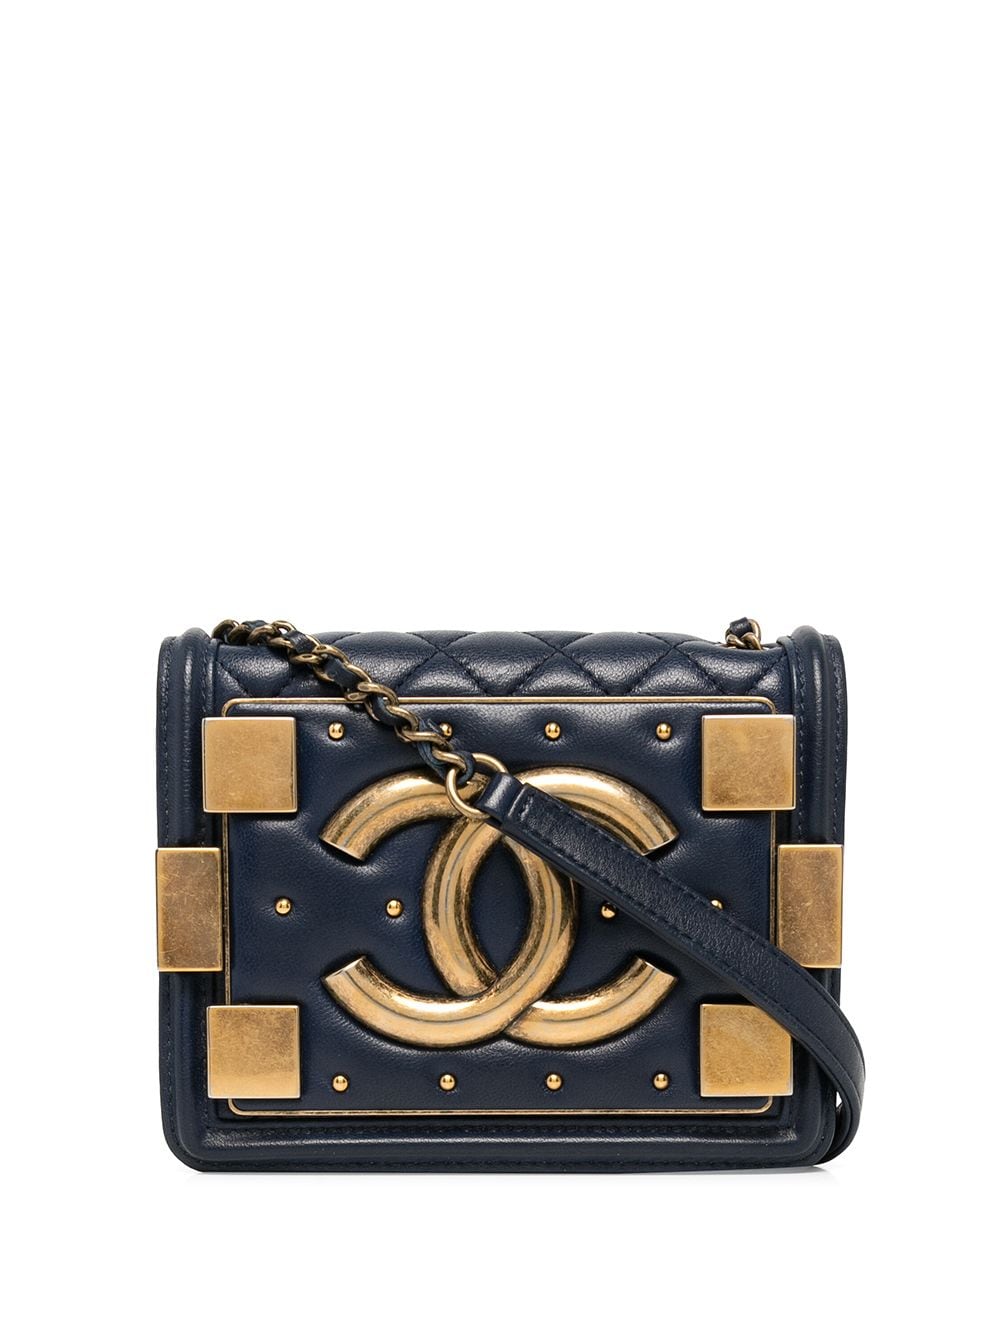 Chanel Classic Flap Bag in Black Velvet 2016 Collection